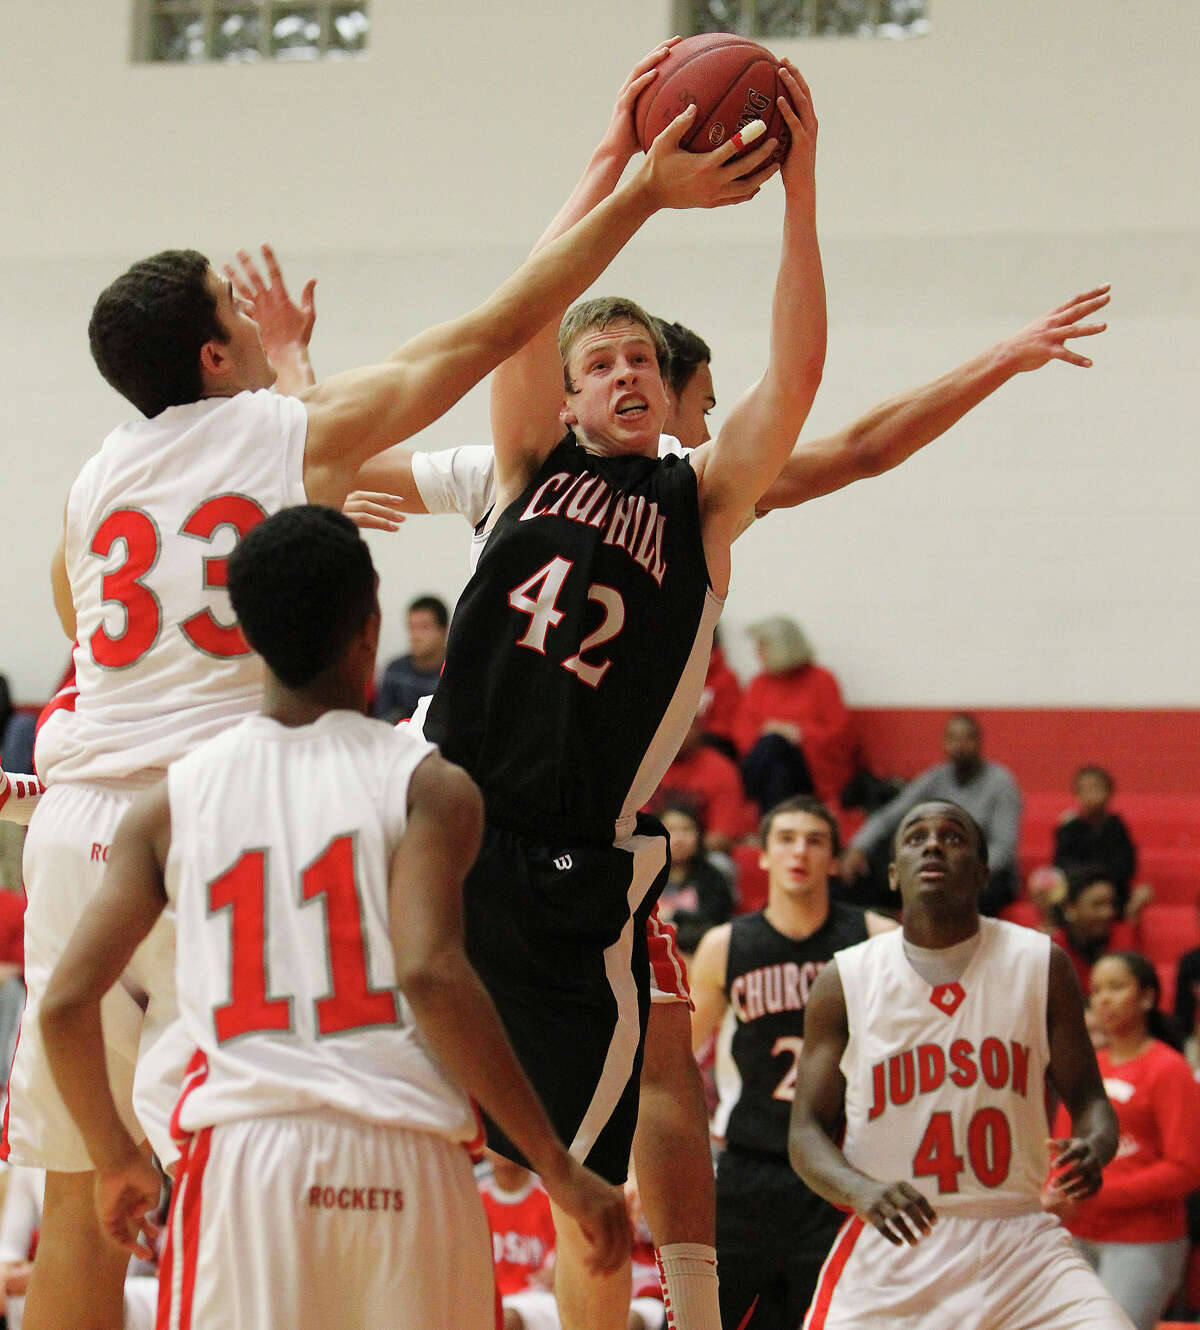 Churchill's Brian Herring (42) grabs a rebound against a gropu of Judson players including David Wacker (33) during their non-district game at Judson on Tuesday, Dec. 11, 2012. Churchill defeated Judson, 57-54.